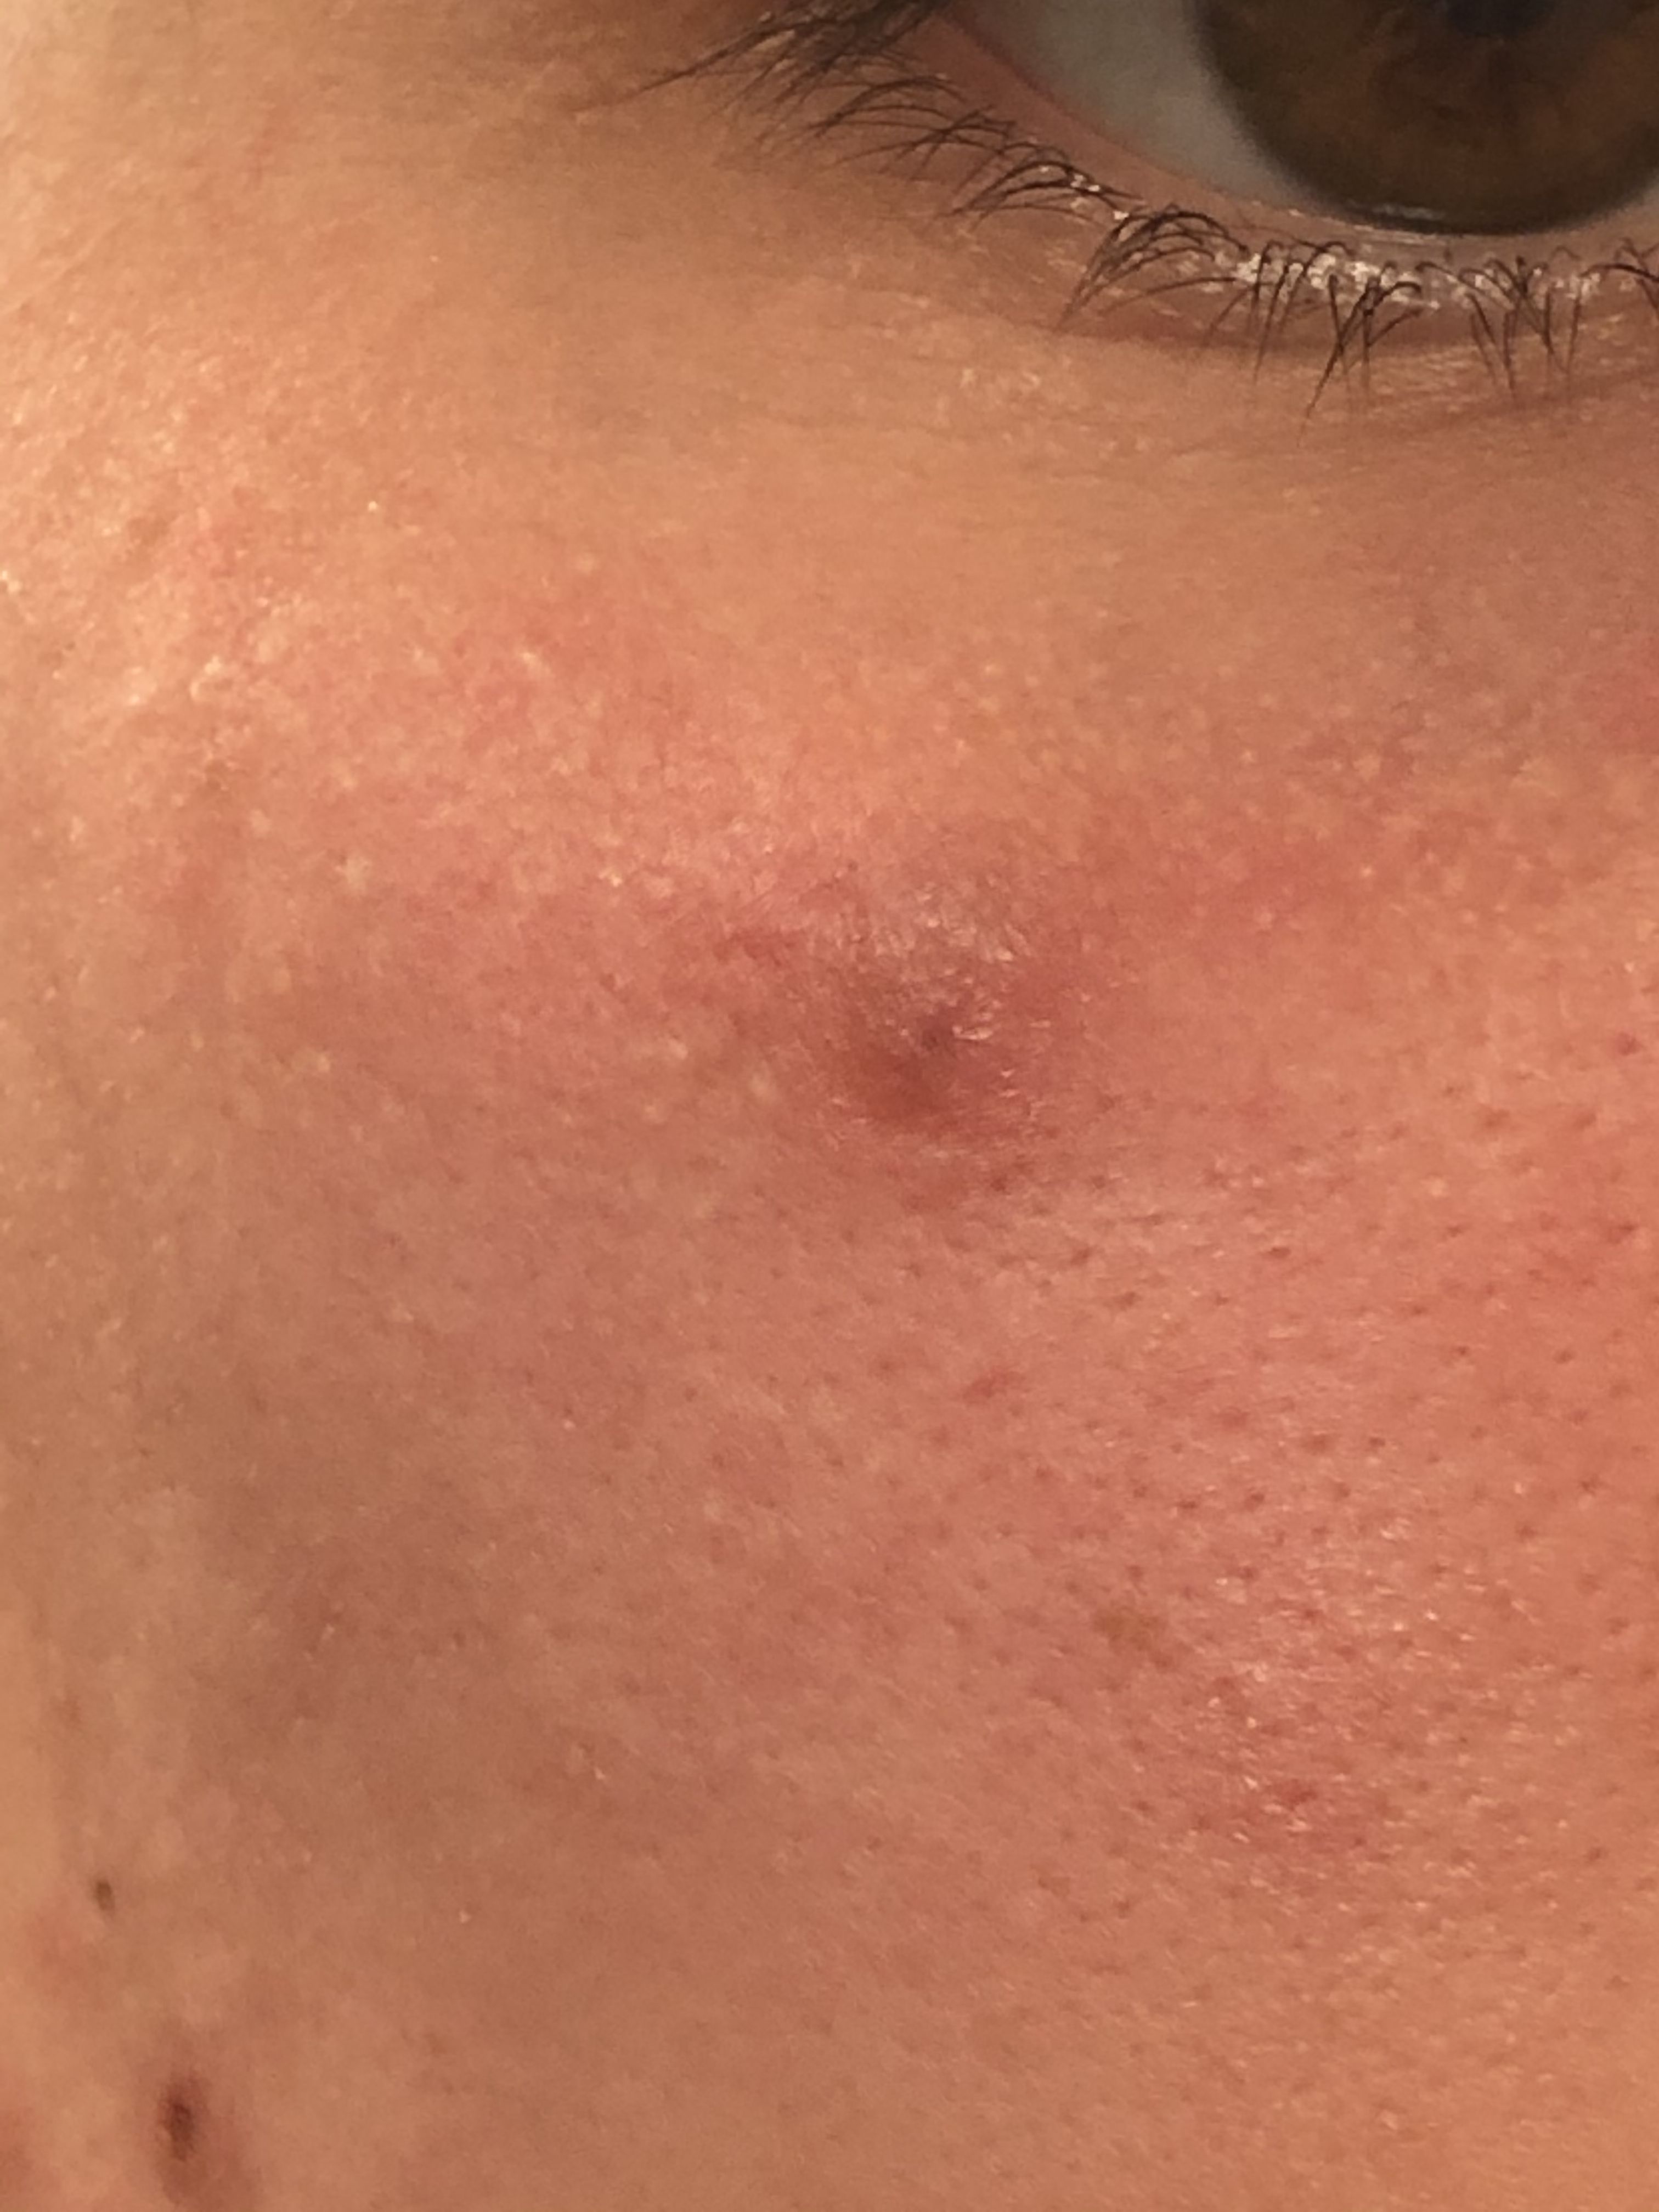 Mysterious Bump Under Eye HELP! — It’s been a month! - General acne